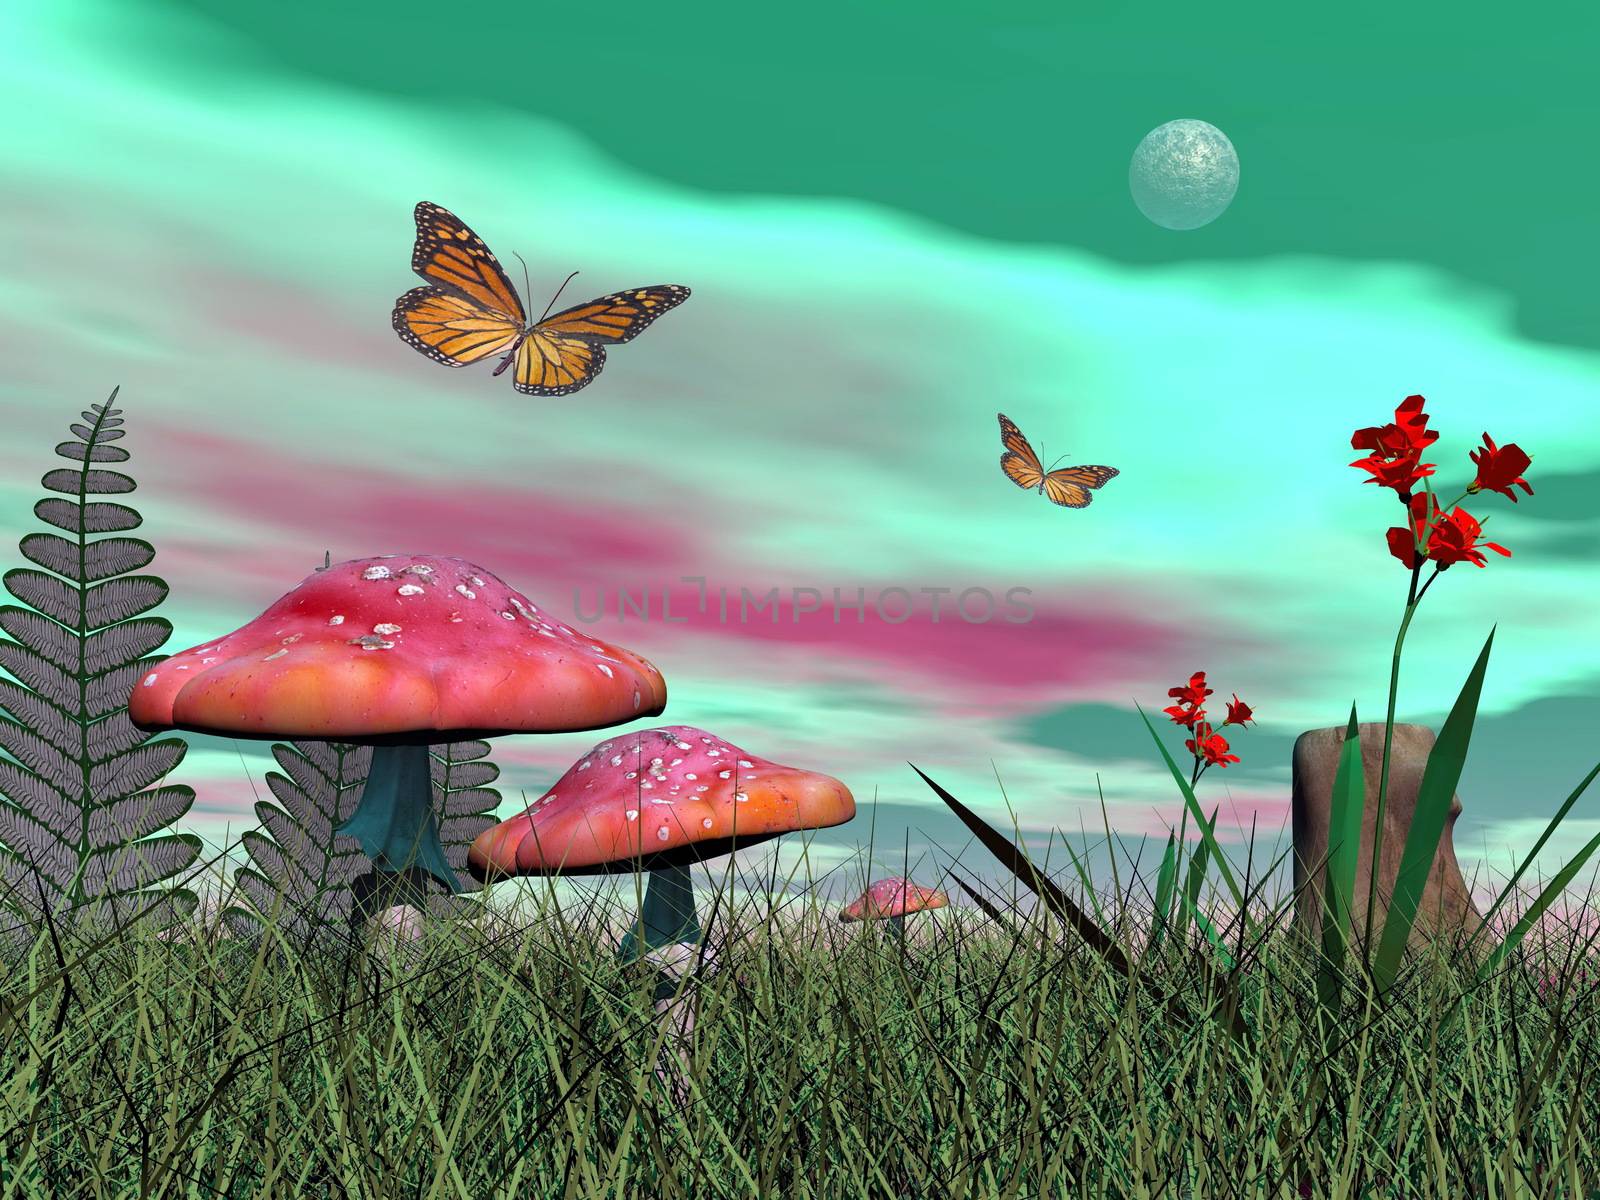 Fairy mushrooms, colorful flowers and monarch butterflies flying by green full moonlight